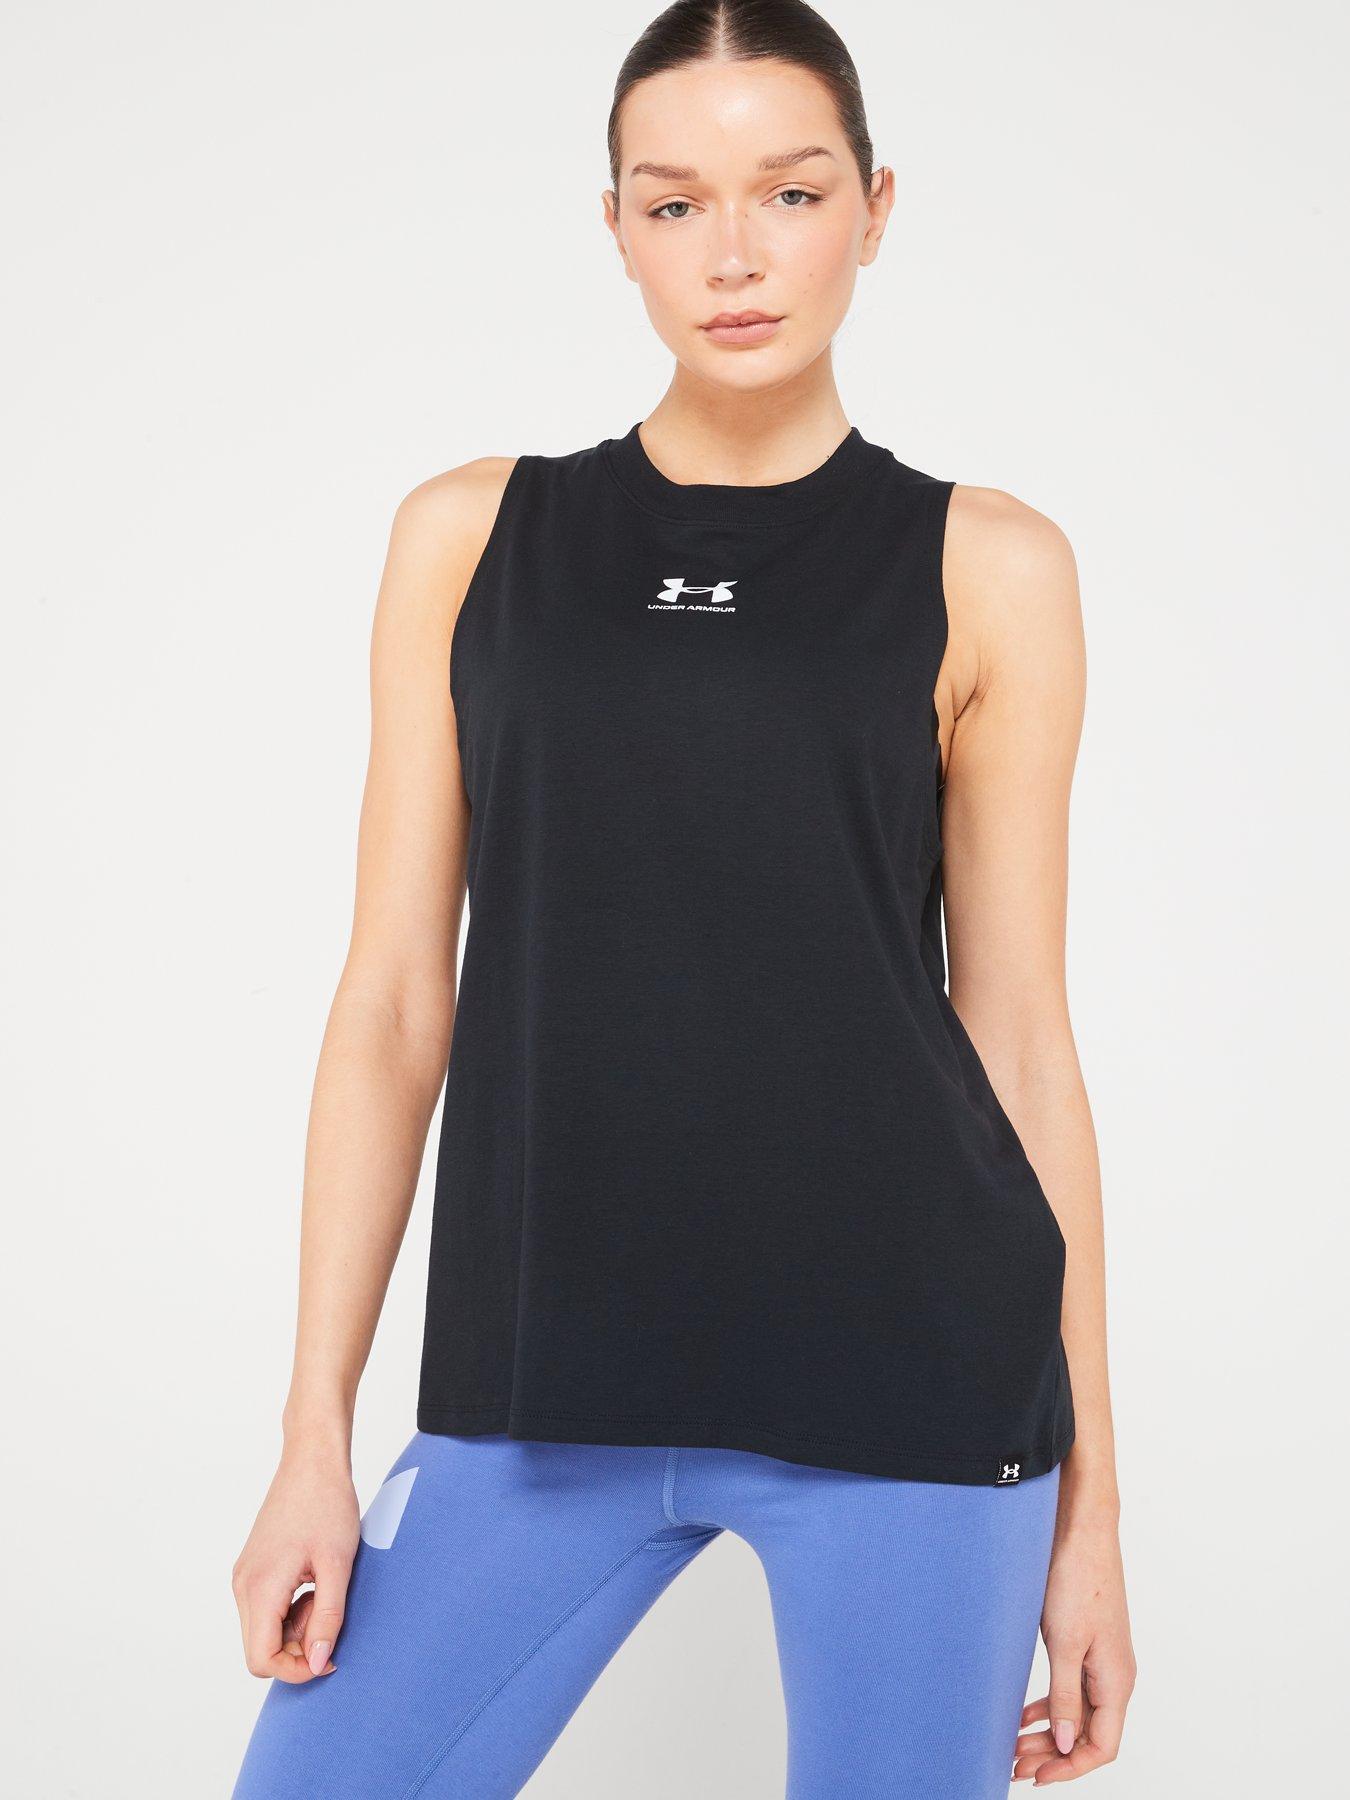 UNDER ARMOUR Womens Training Knockout Novelty Tank - Pink/Black